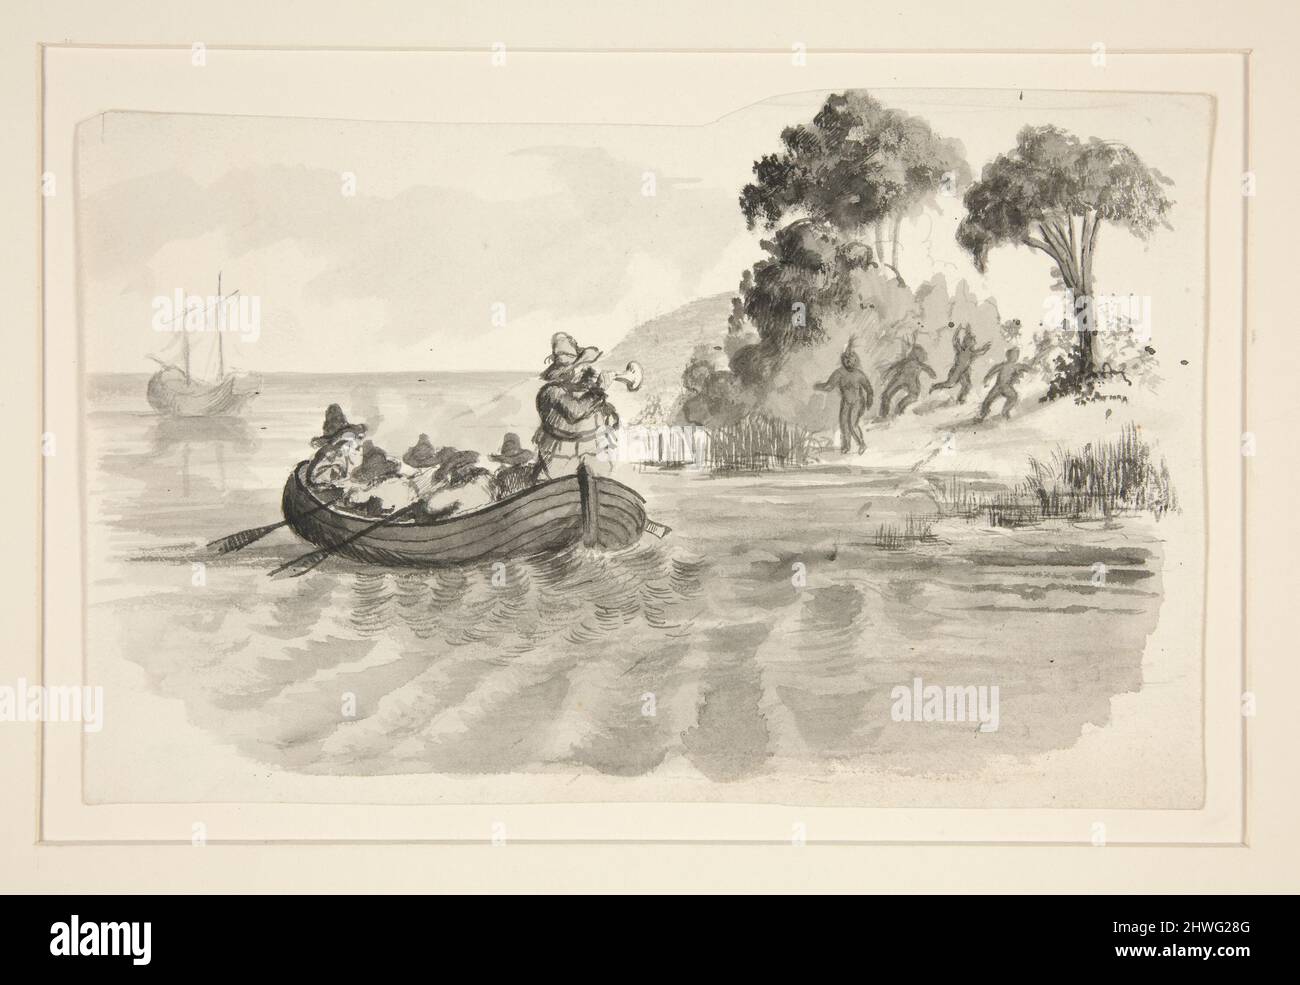 Men in rowboat fleeing Indians on shore - unidentified illustration (Columbus discovering New World?) - explorers landing in the New World.  Artist: Edwin Austin Abbey, American, 1852–1911, M.A. (HON.) 1897 Stock Photo